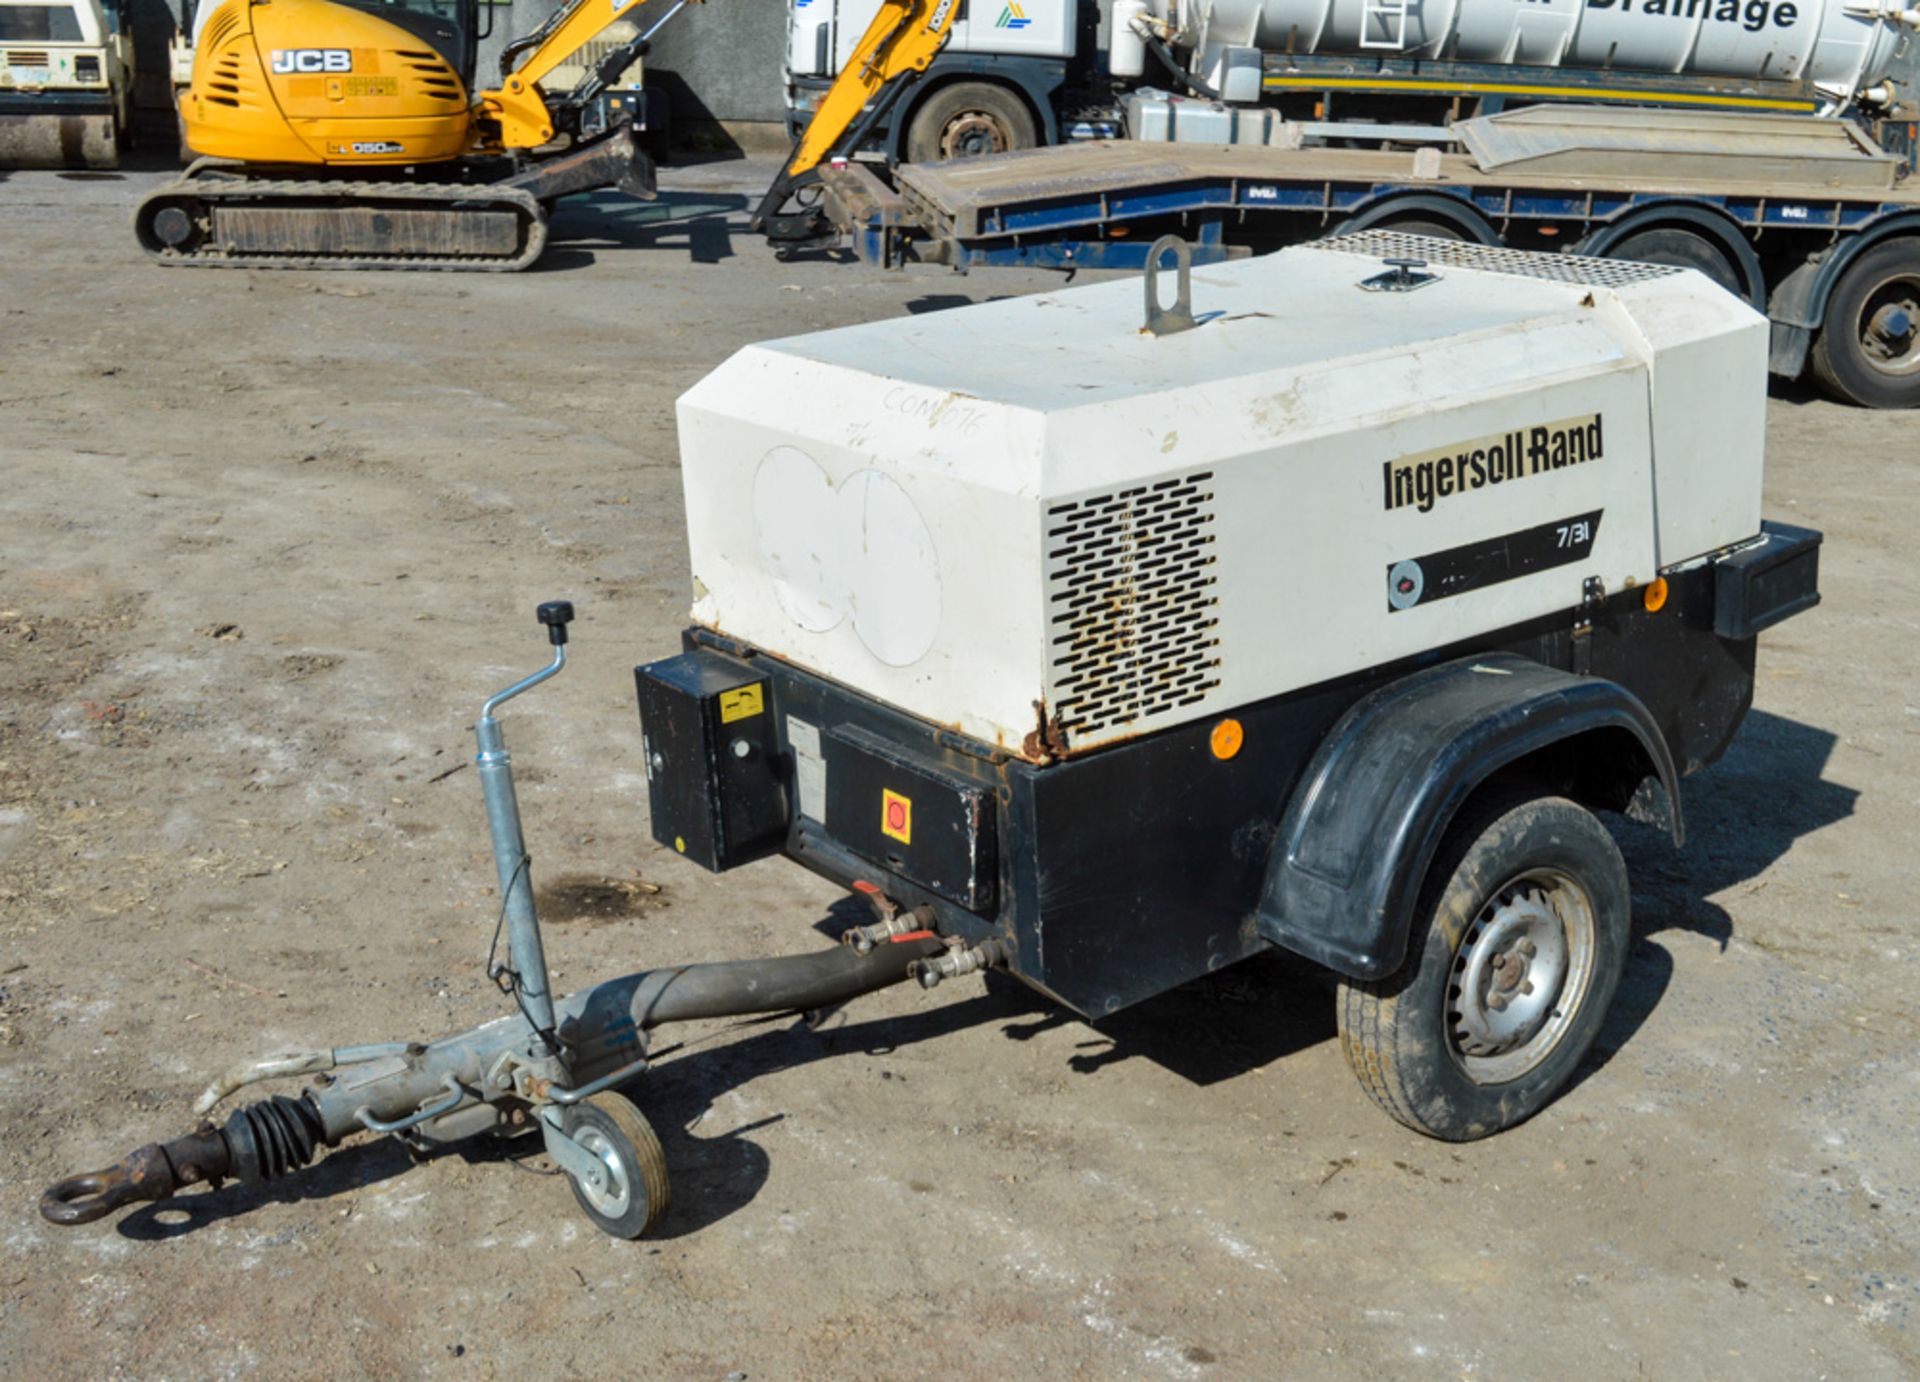 Ingersoll Rand 7/31 diesel driven mobile air compressor/generator Year: 2005 S/N: 317808 Recorded - Image 2 of 5